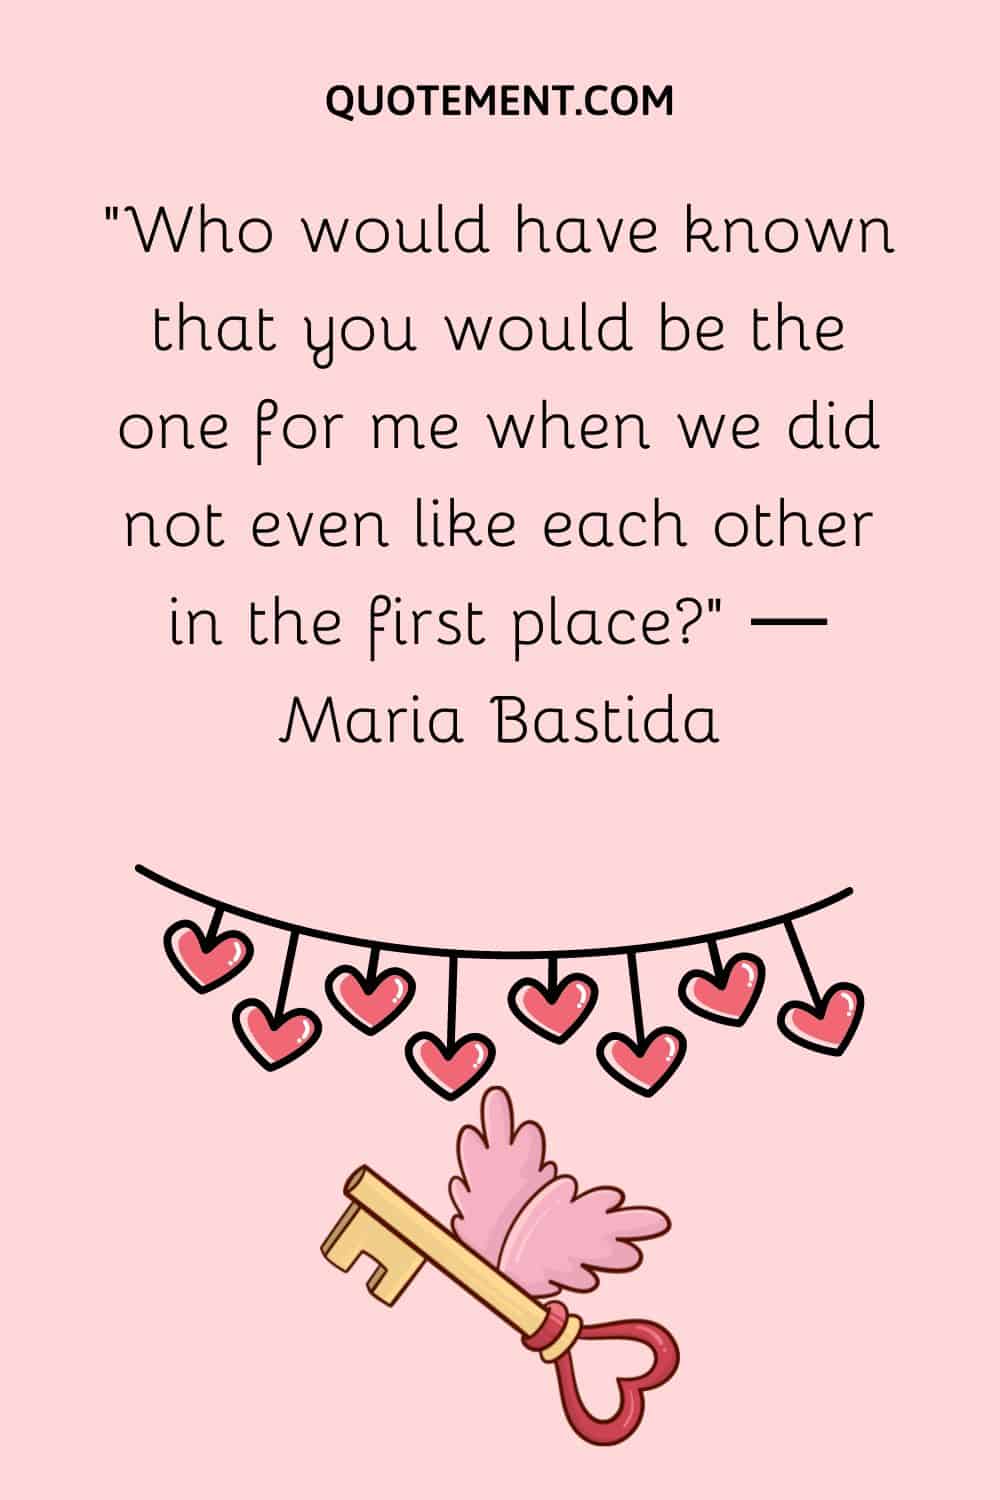 “Who would have known that you would be the one for me when we did not even like each other in the first place” ― Maria Bastida